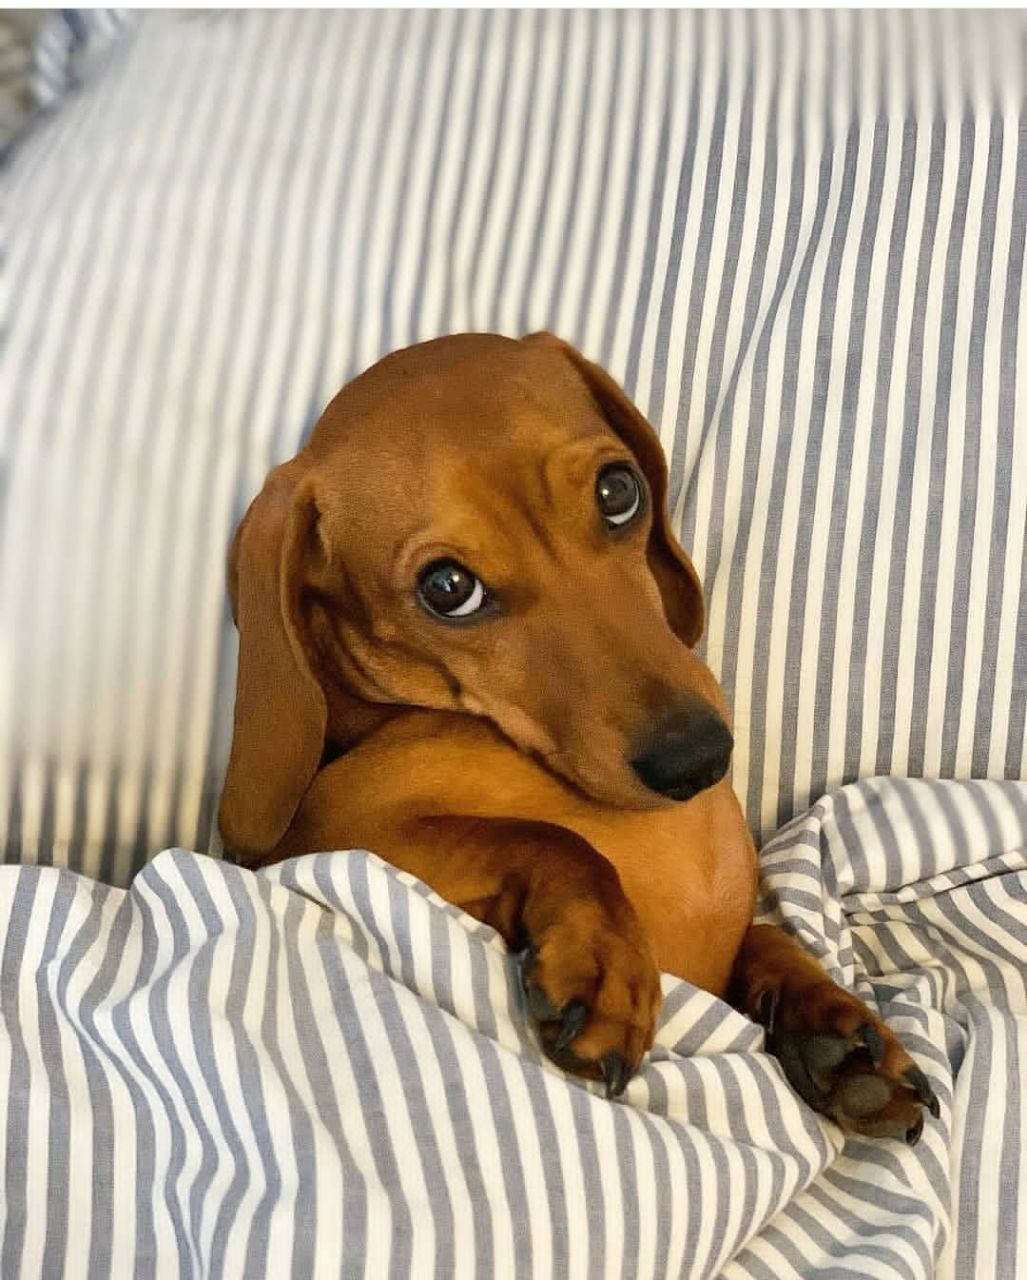 14 Photos Of The Funniest Dachshunds You Have Ever Seen | Page 3 of 3